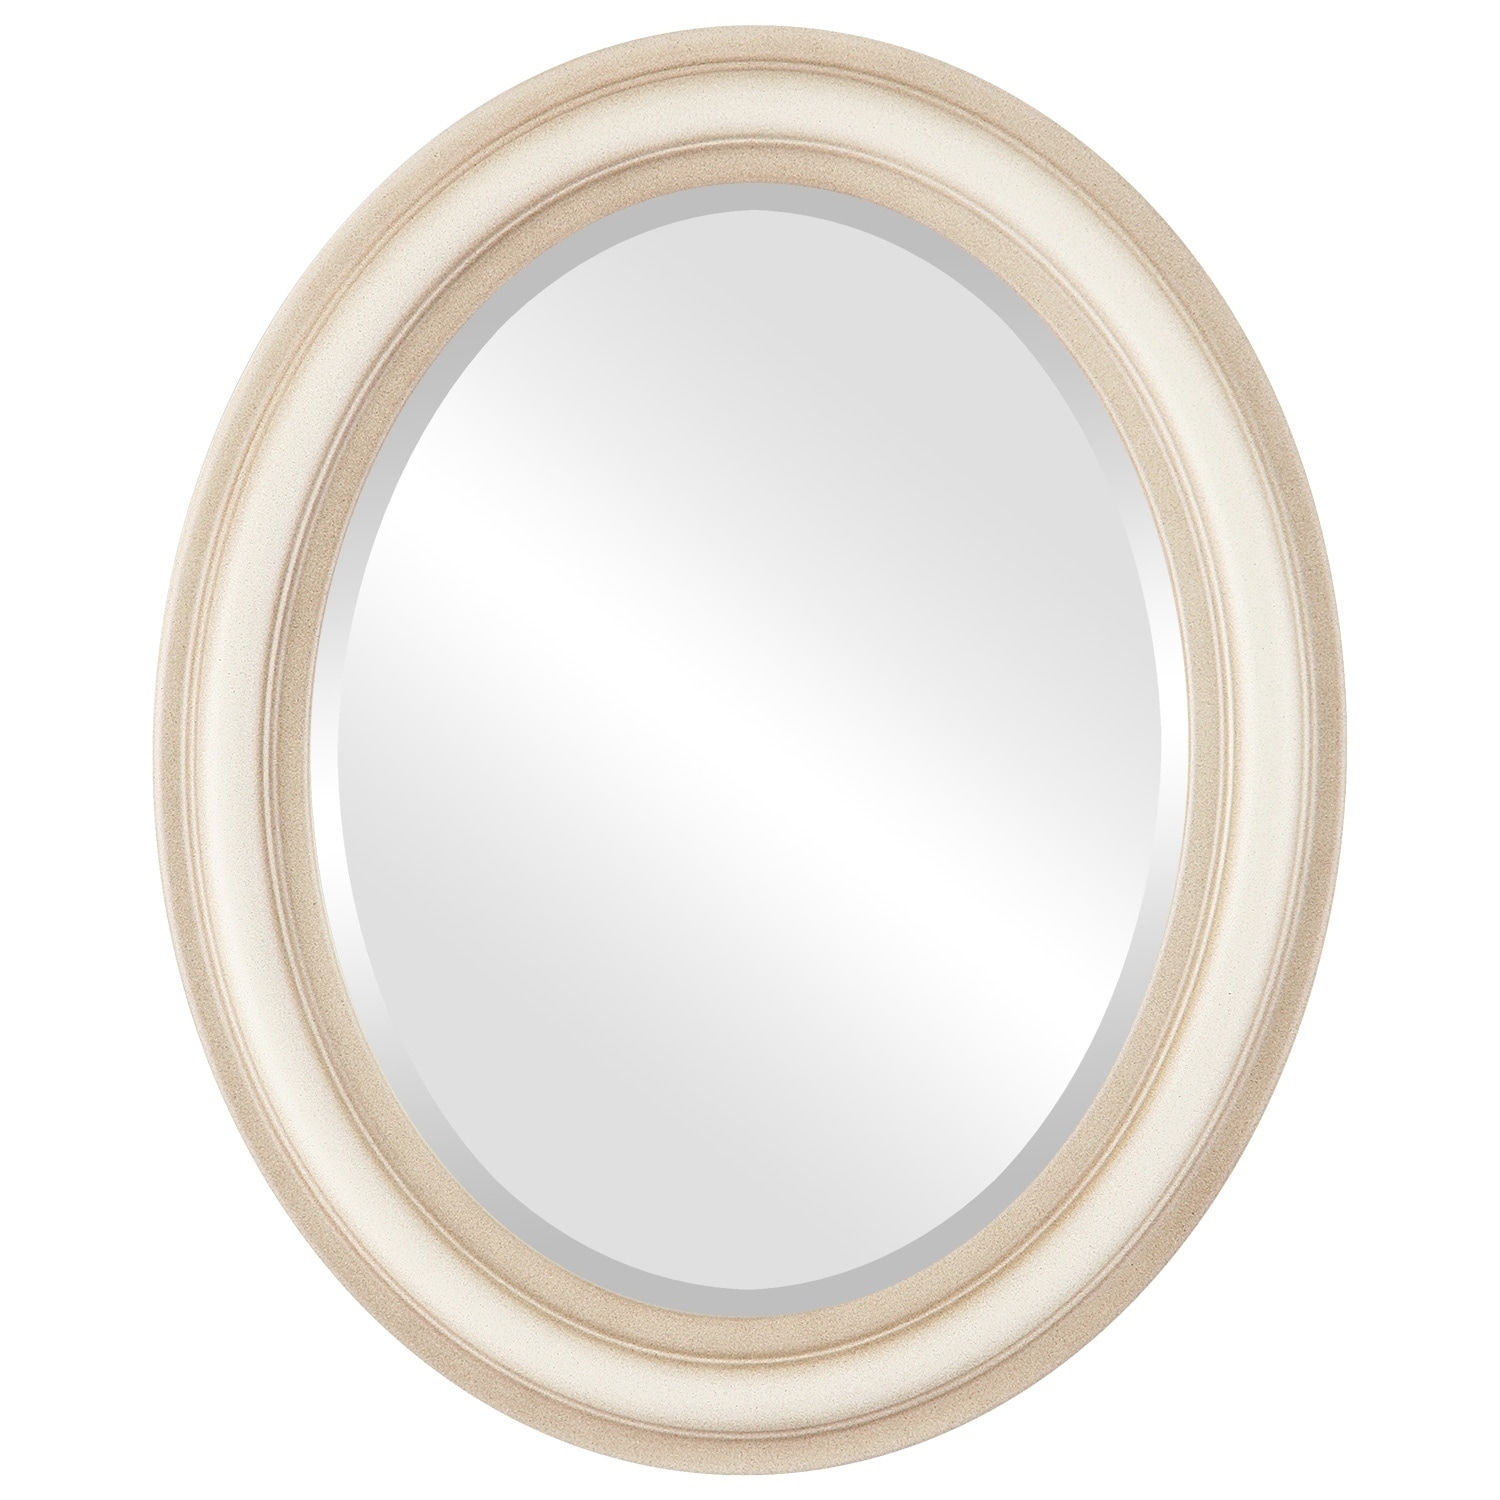 Philadelphia Framed Oval Mirror in Taupe Bed Bath  Beyond 20730639